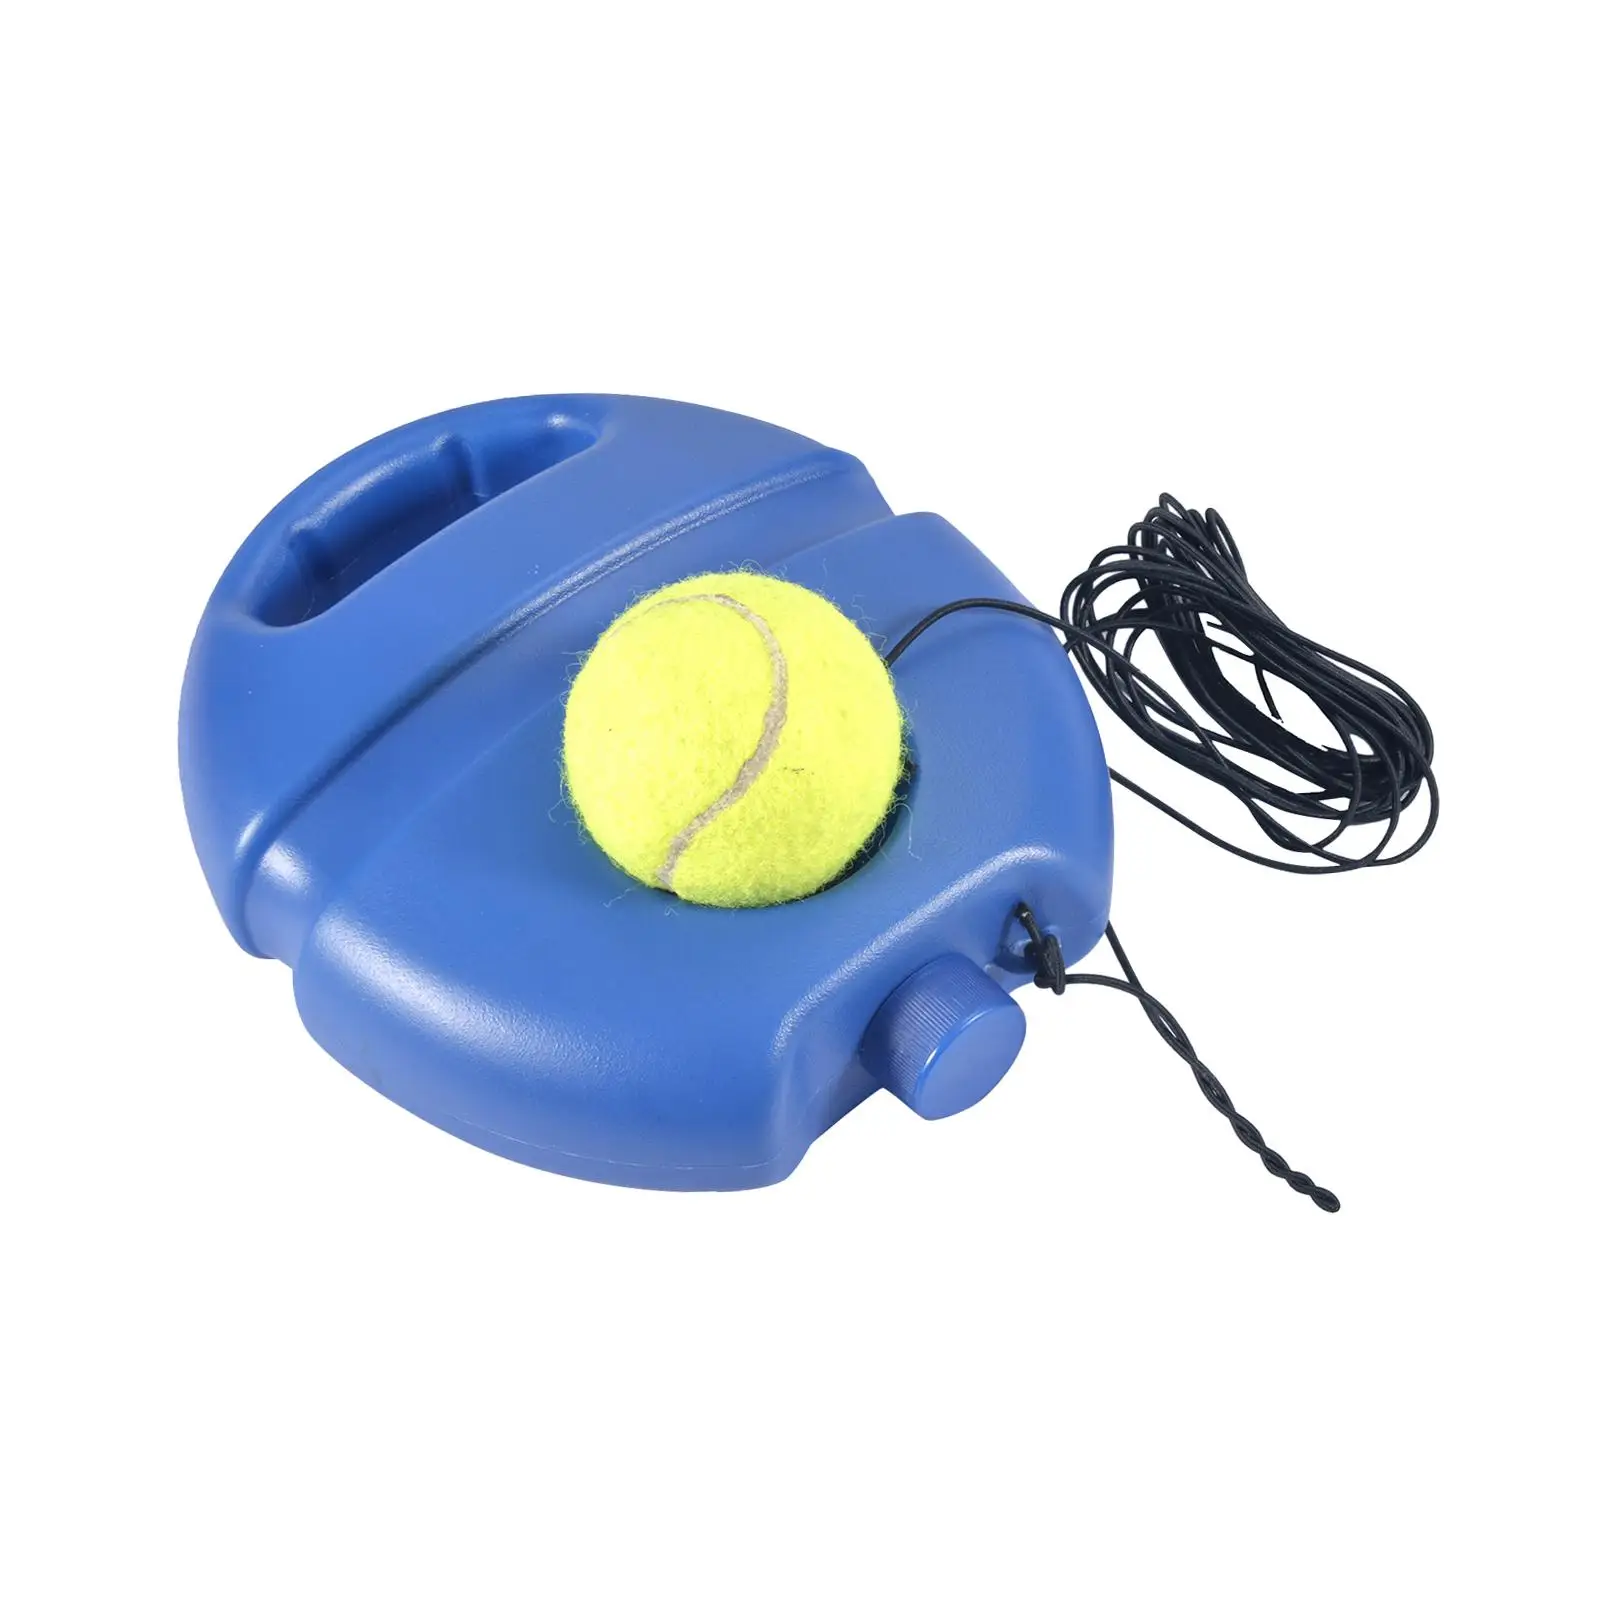 Tennis Trainer Base Tennis Training Equipment Pickleball Trainer Solo Tennis Trainer for Beginners Sports Outdoor Exercise Tool